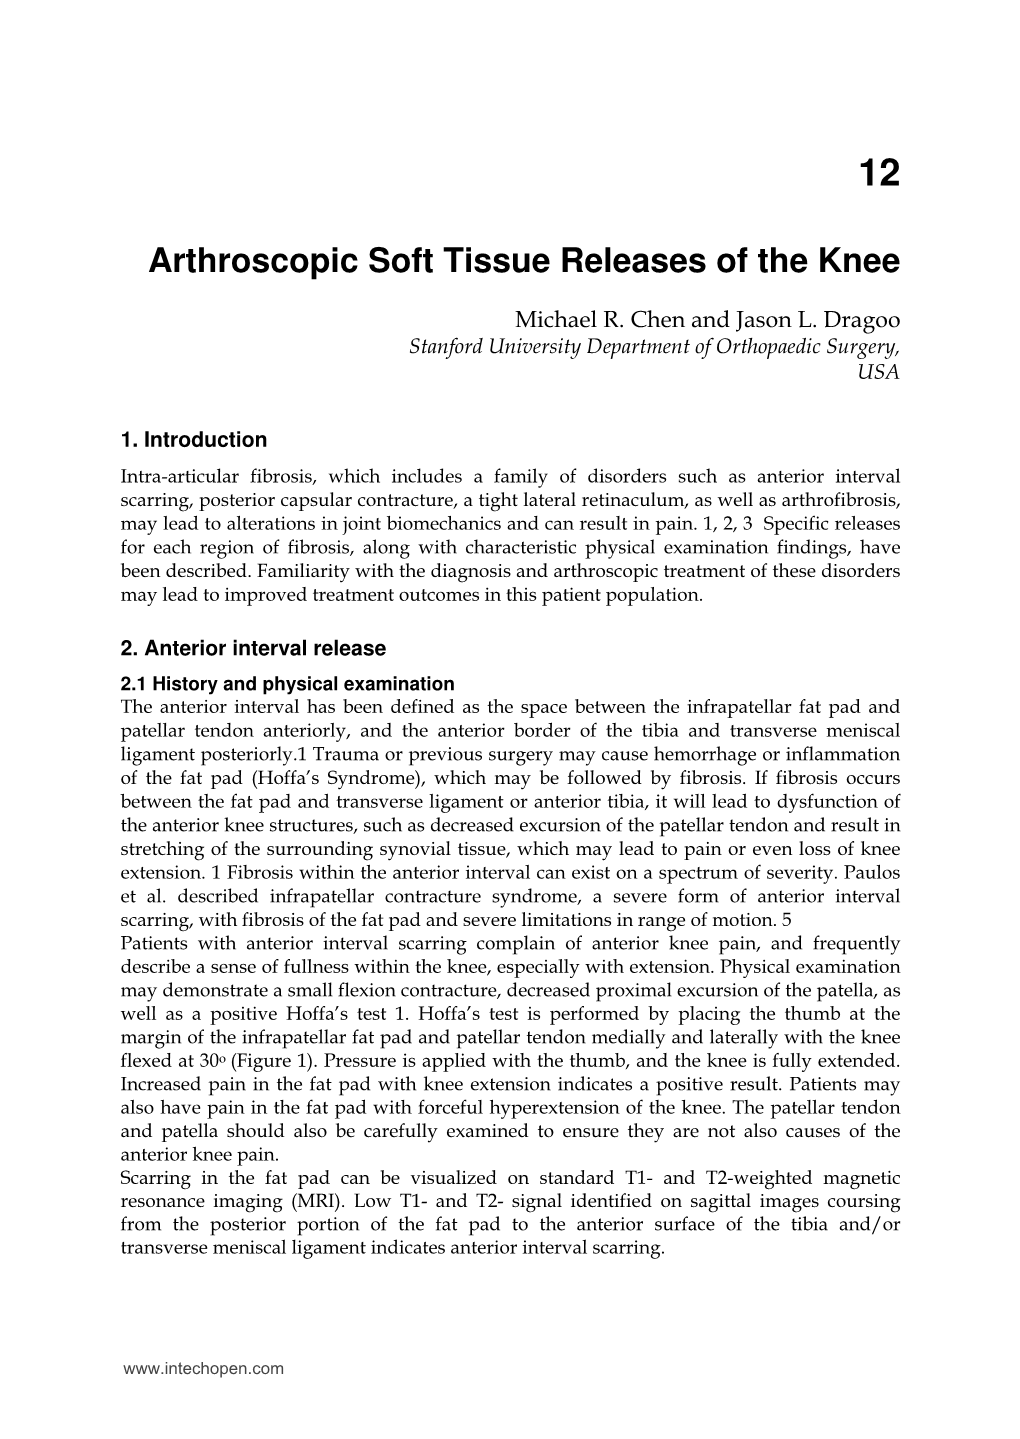 Arthroscopic Soft Tissue Releases of the Knee